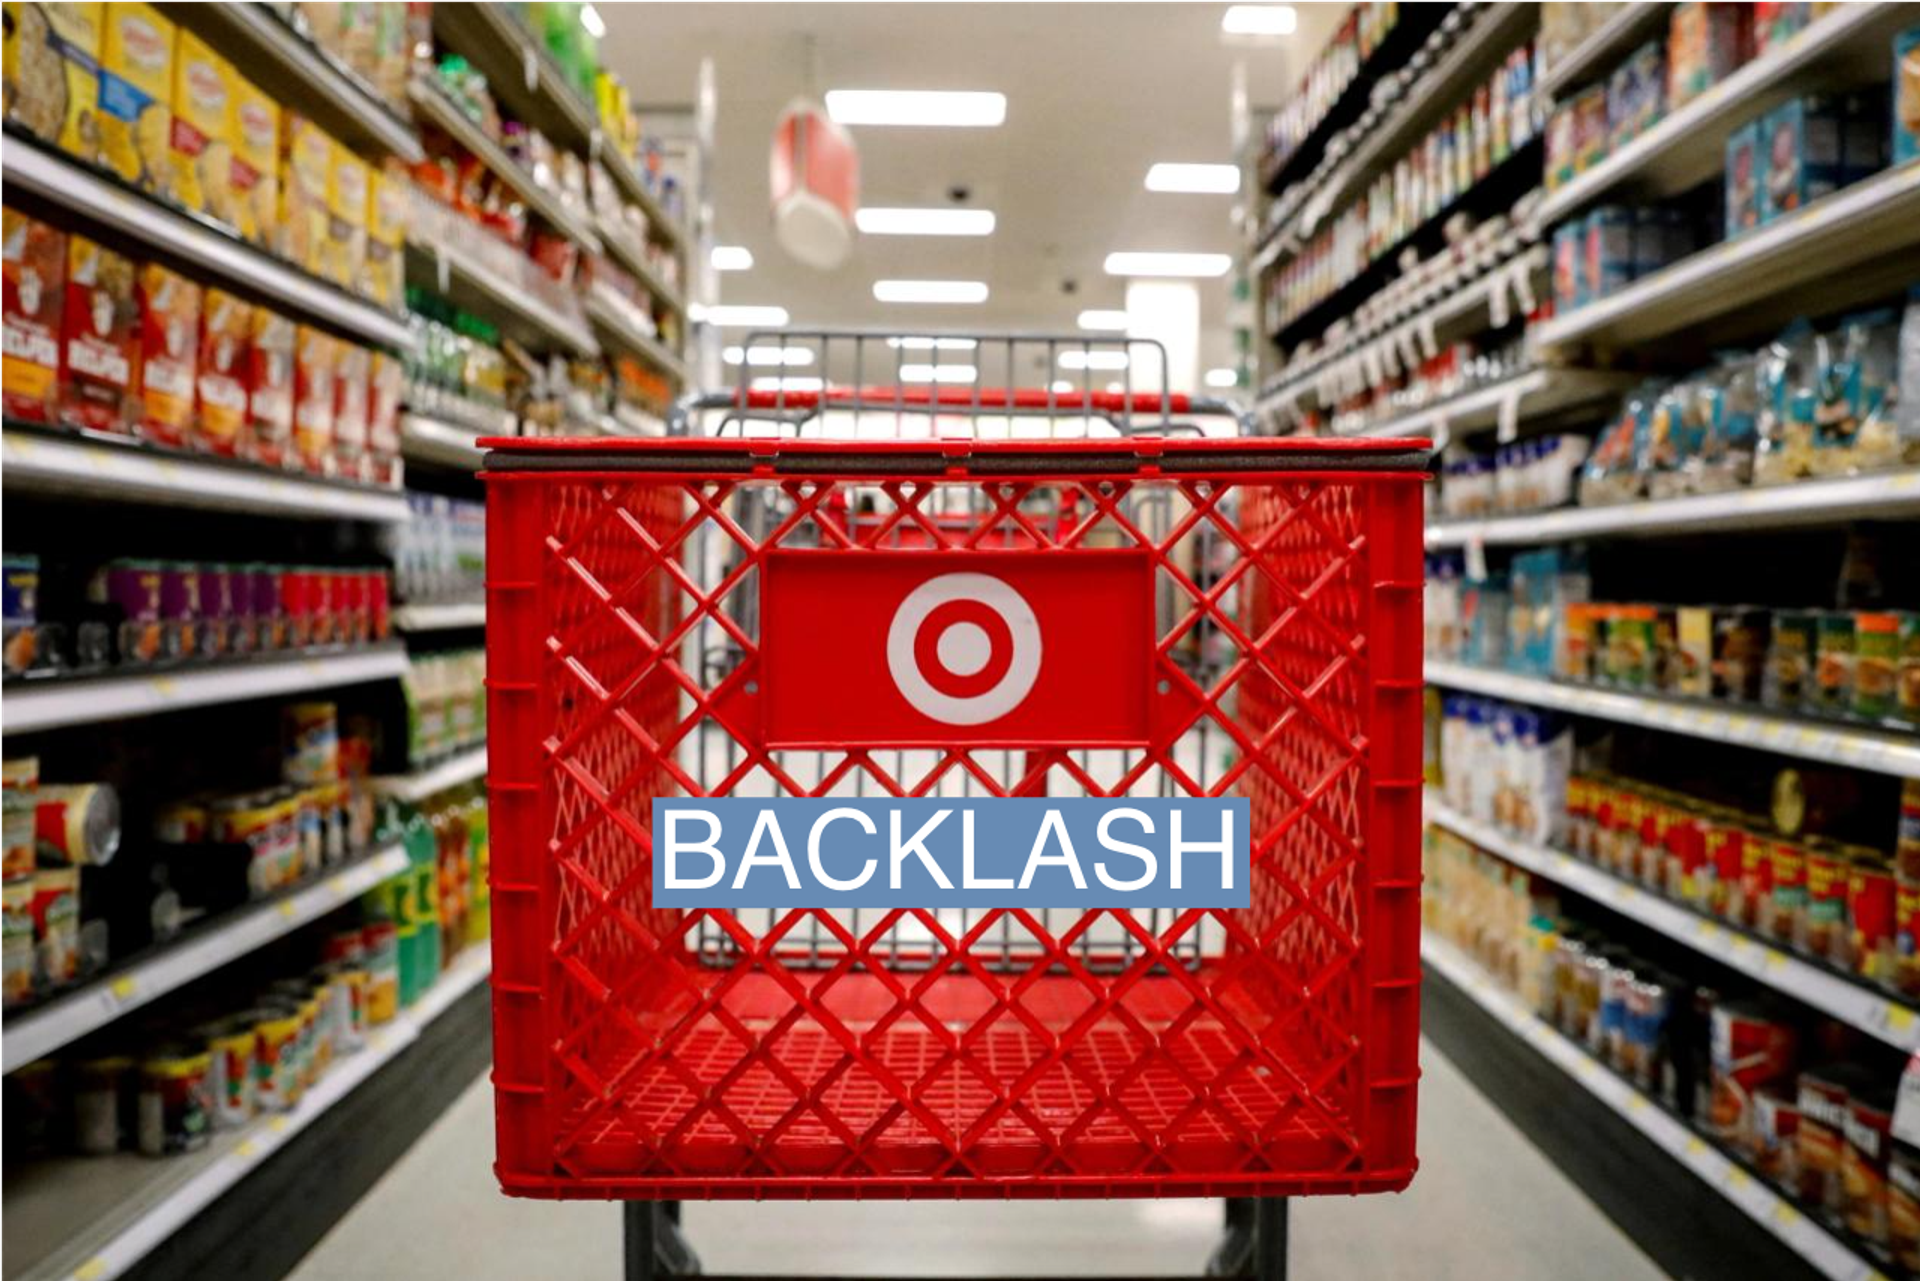  A shopping cart is seen in a Target store in the Brooklyn borough of New York, U.S., November 14, 2017. REUTERS/Brendan McDermid